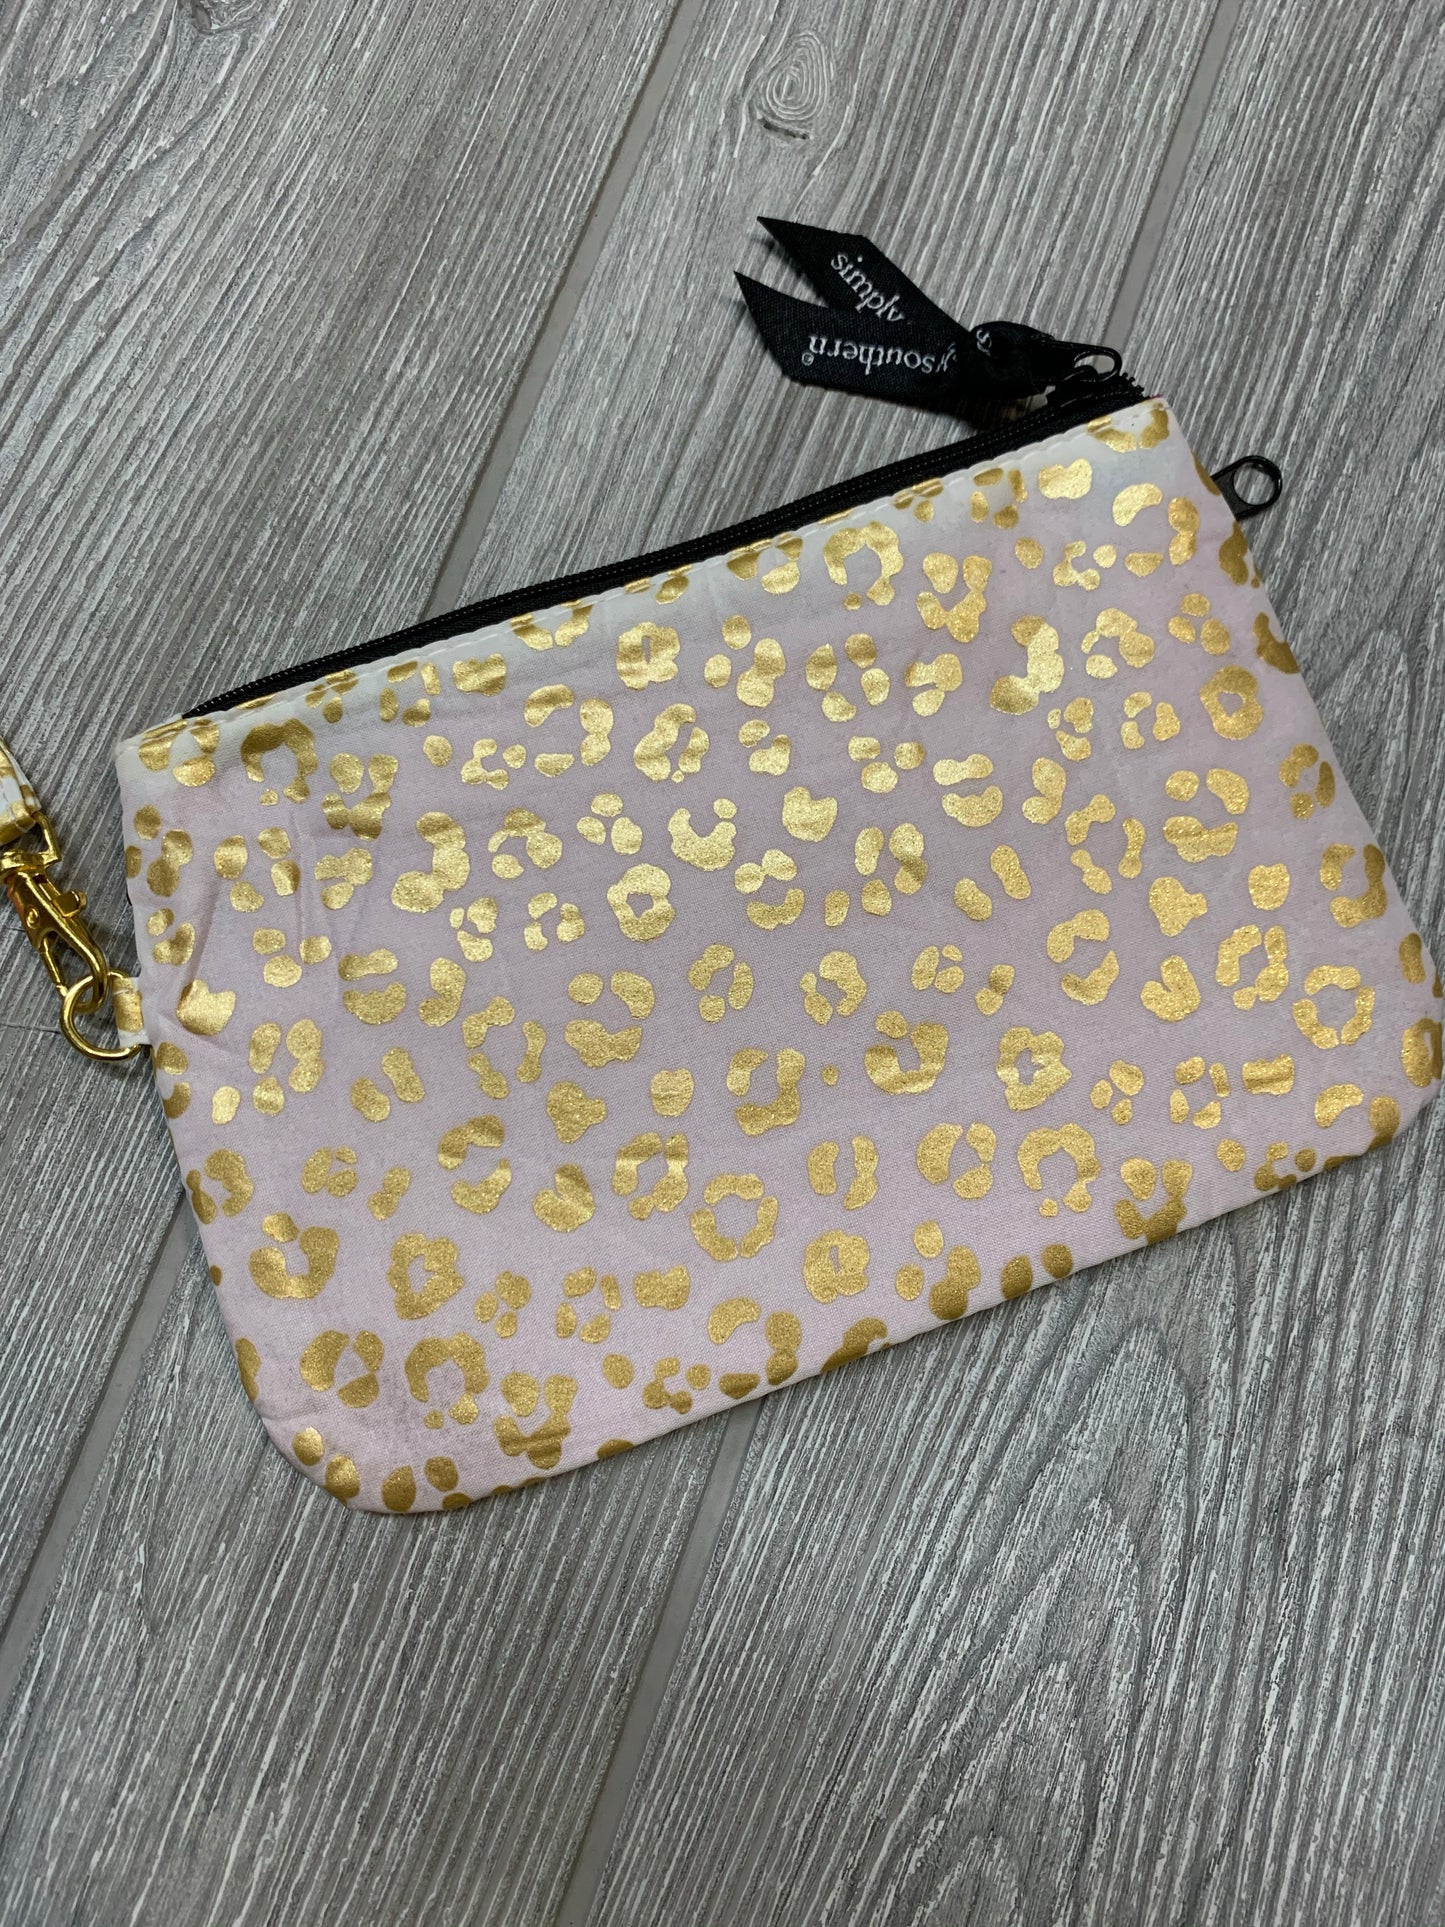 Simply Southern - Phone Wallet Wristlet - Gold Leopard